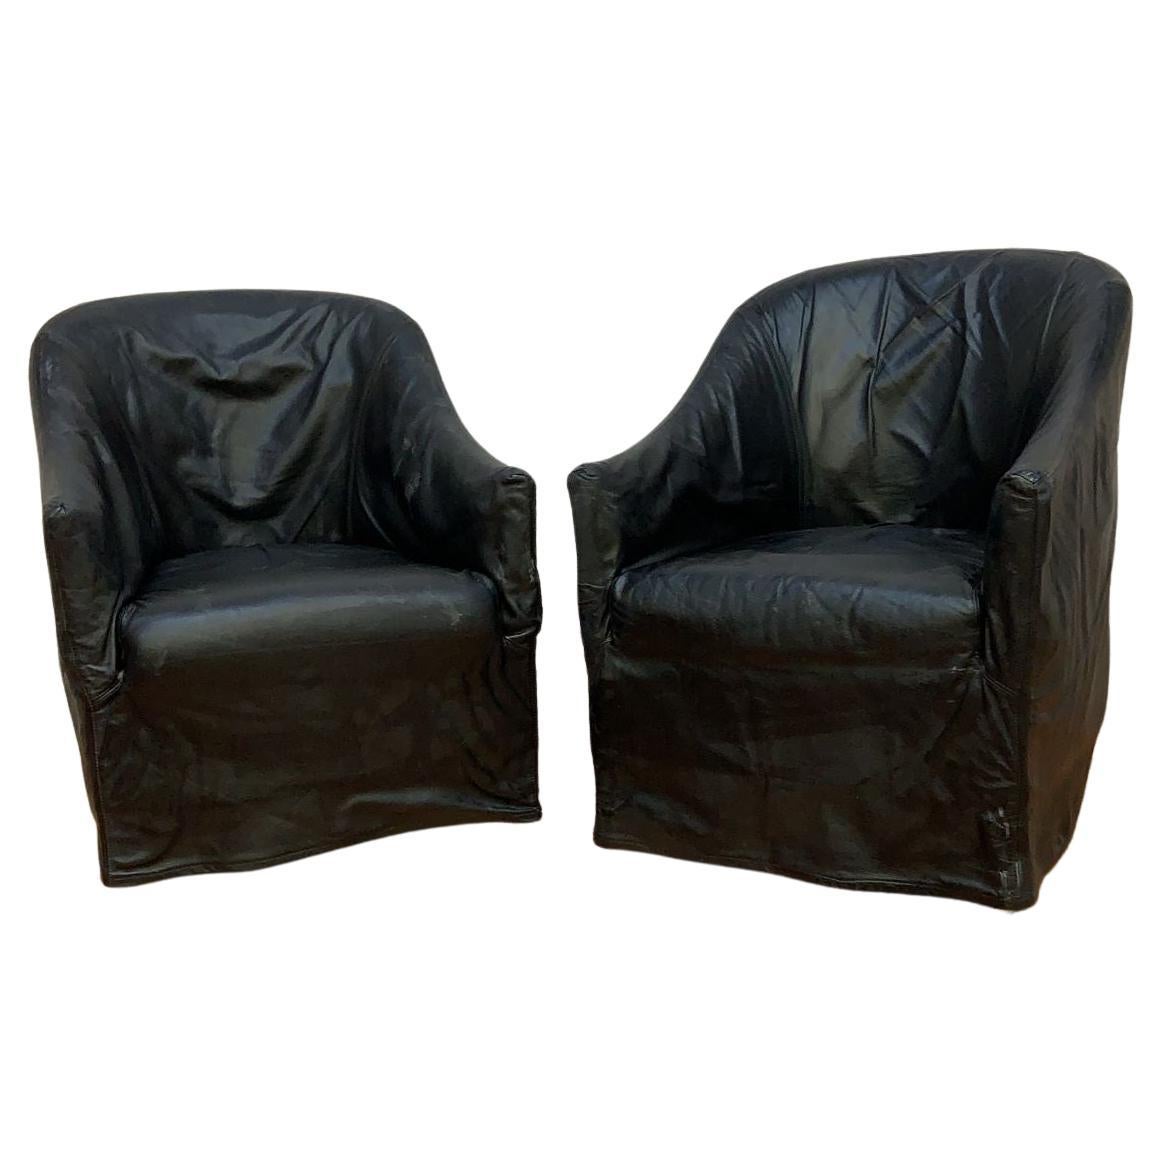 Fitted Black Italian Draped Leather Barrel Back Club Chairs by Niedermaier, Pair